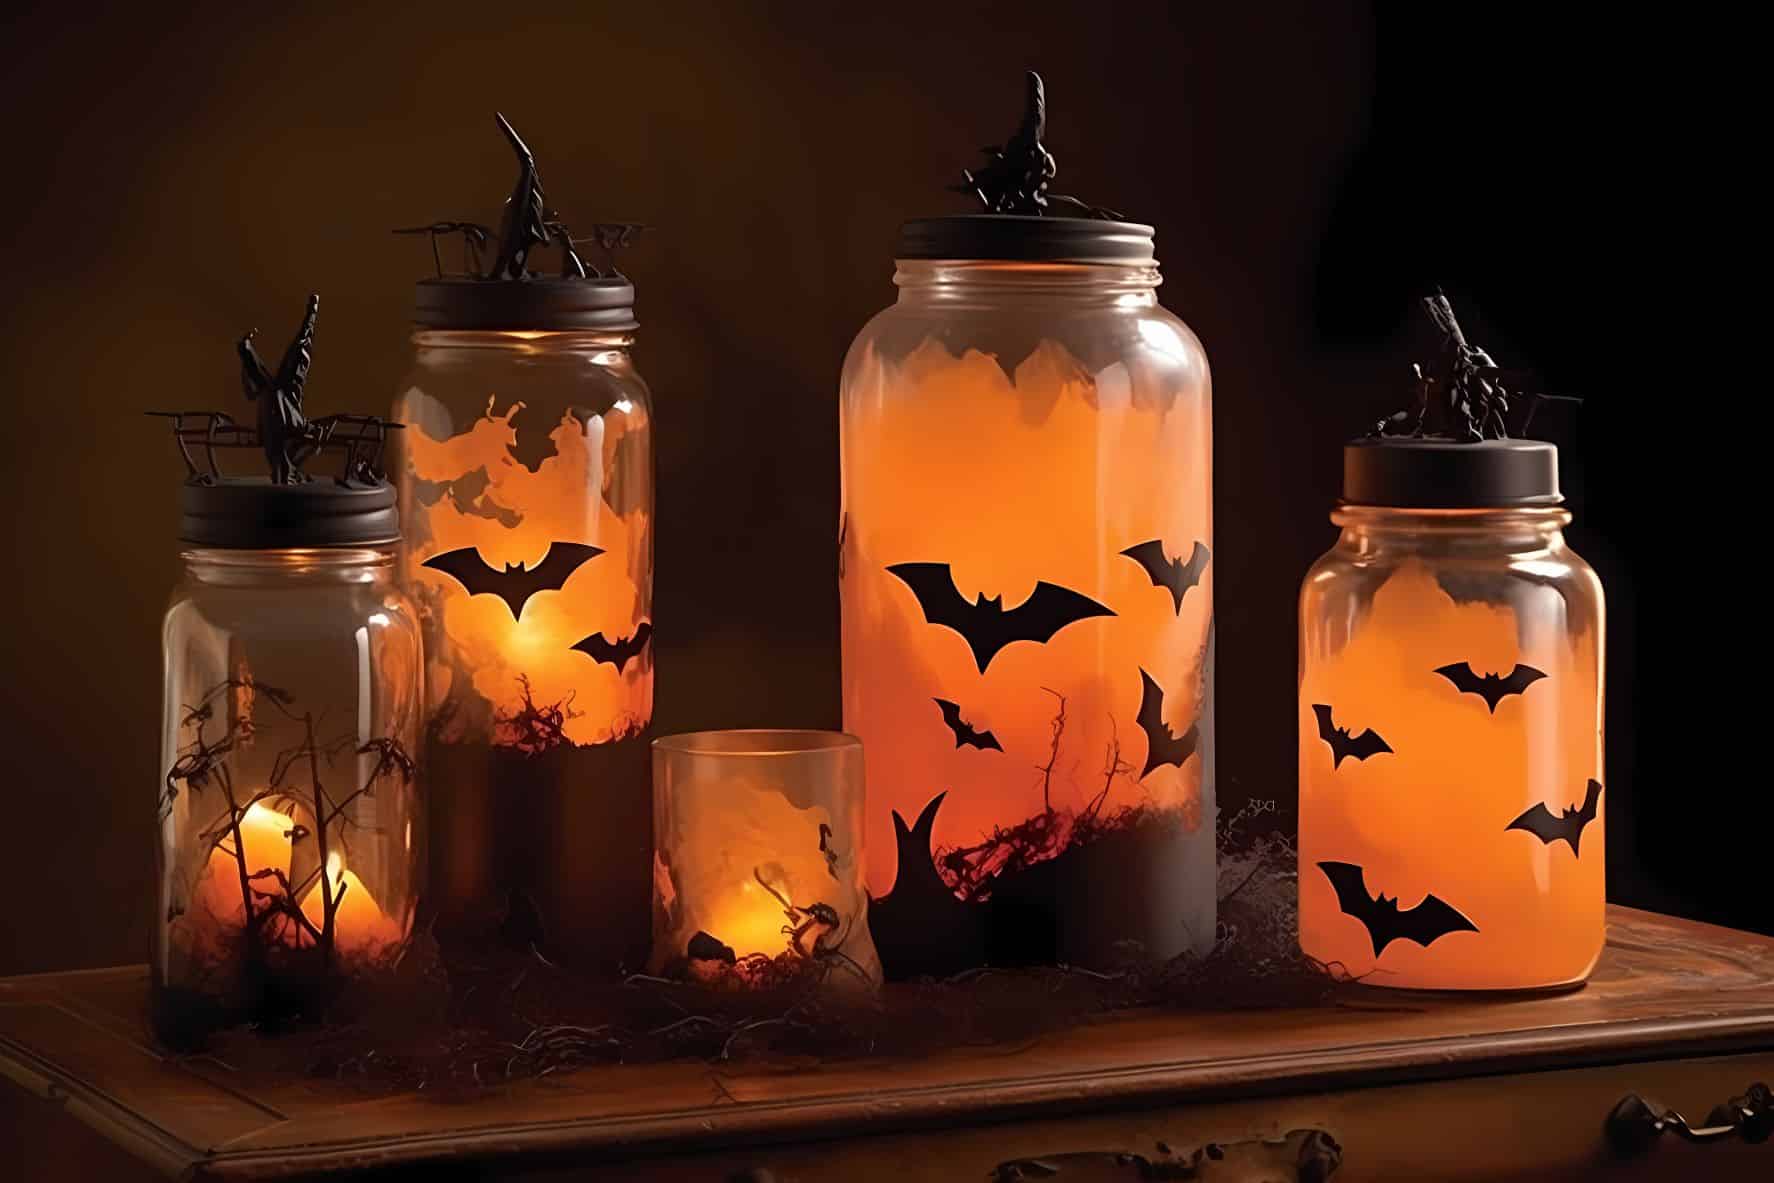 Thrifty Tricks: Spooktacular Halloween Decorations for Less!